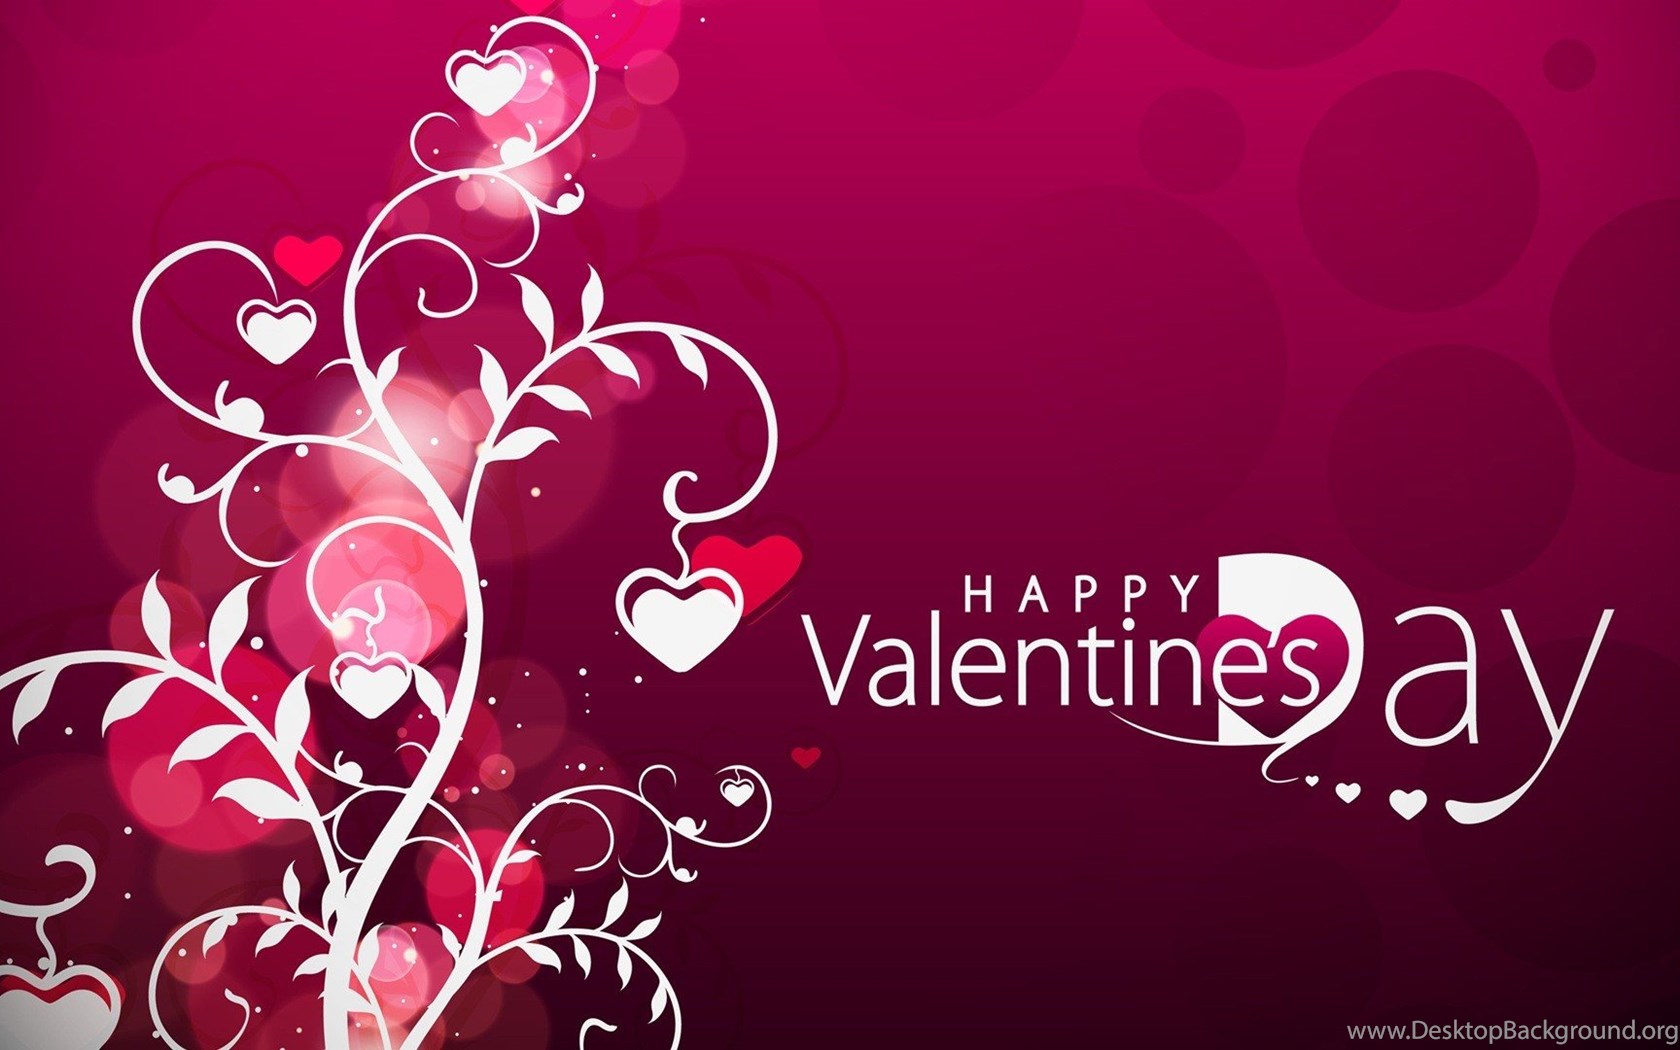 Download Romantic Happy Valentines Day Images For Love, HD Heart Pictures ....